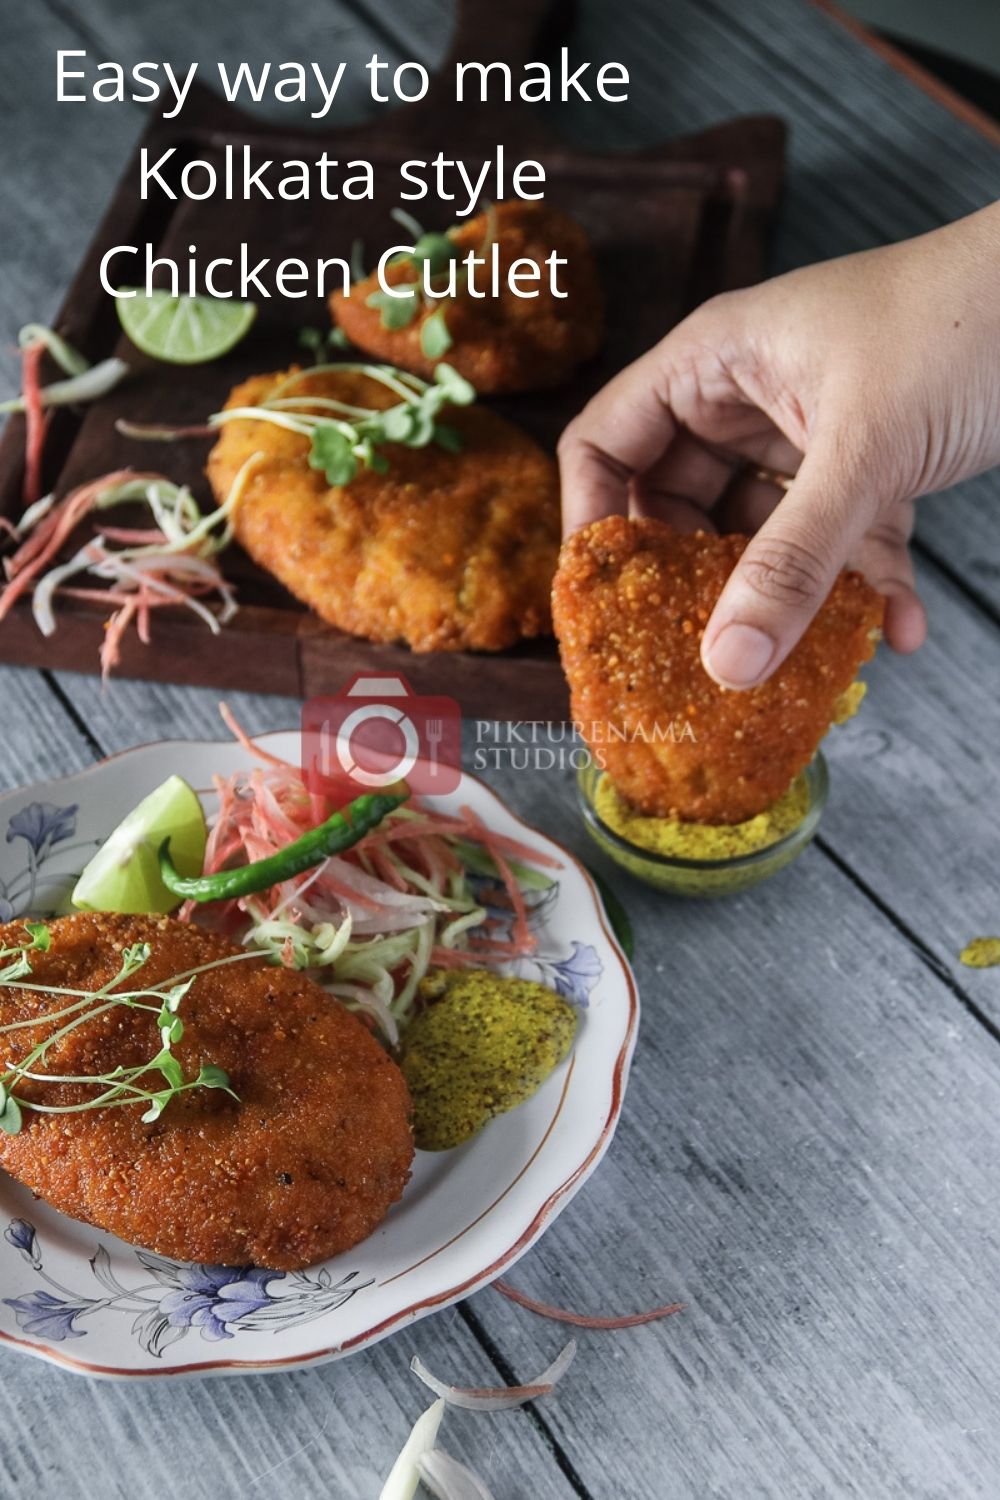 Easy way to make chicken cutlet for pinterest -3